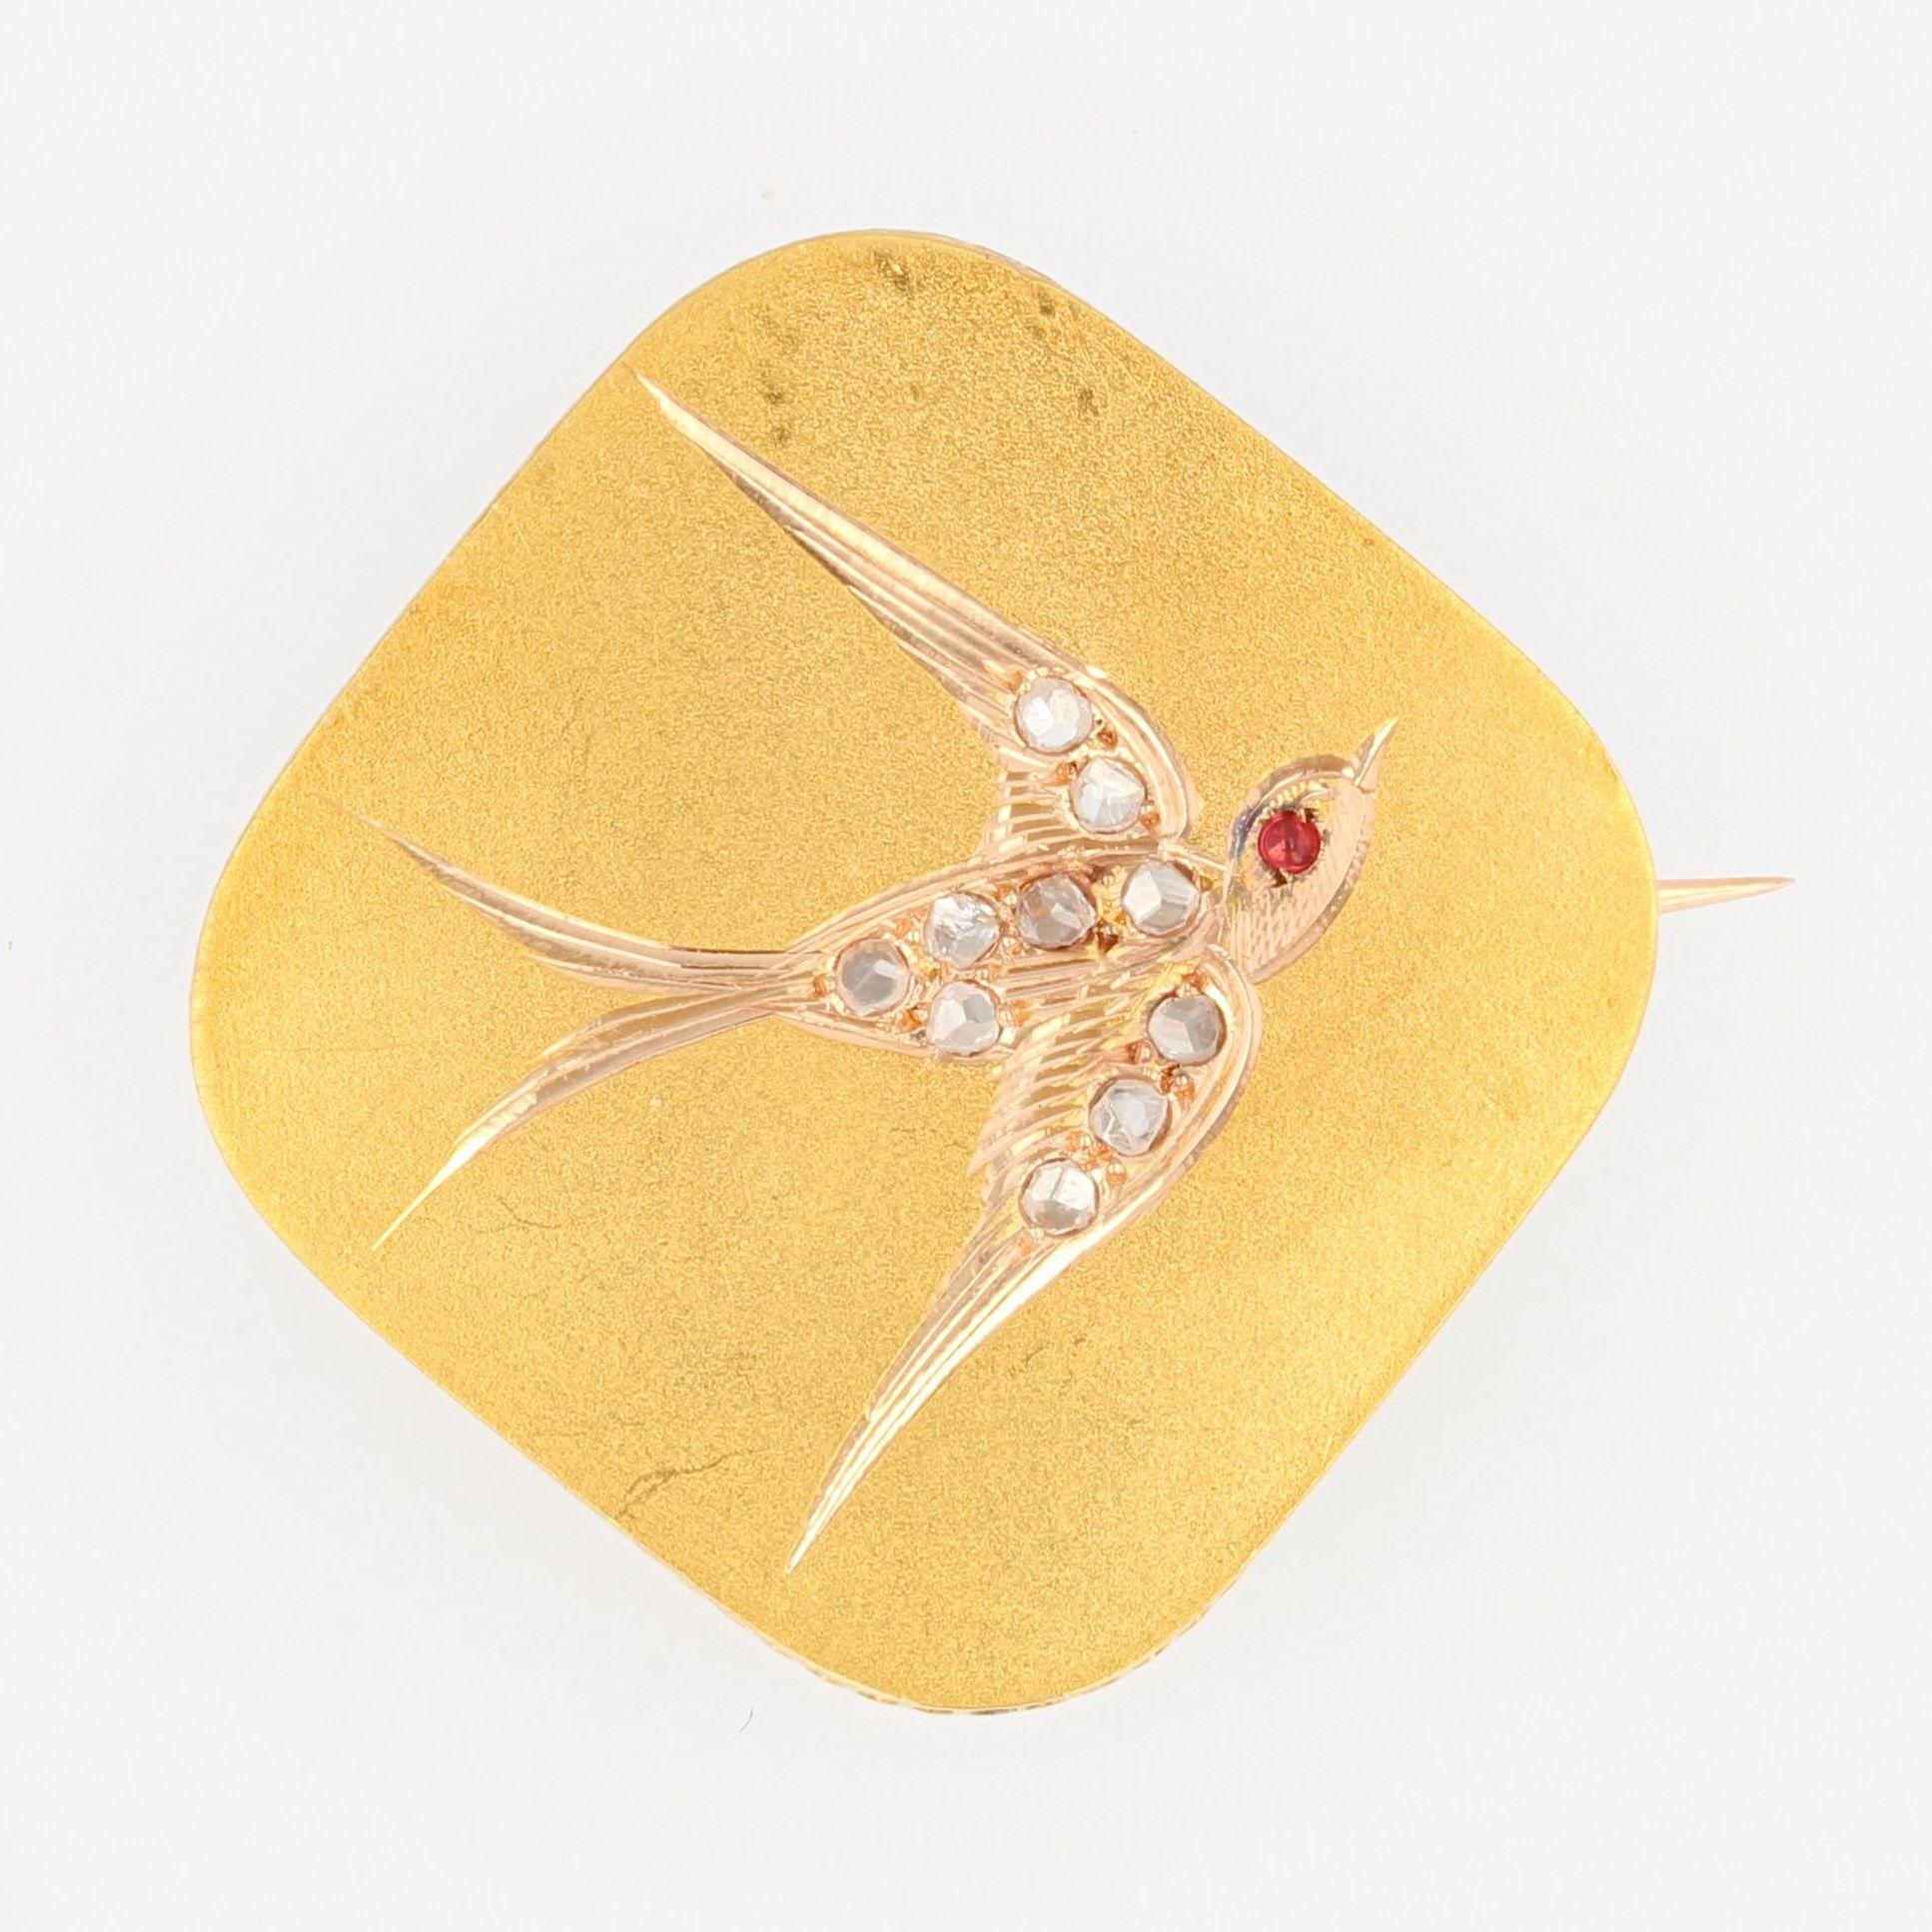 Brooch in 18 karat rose gold, eagle head hallmark.
Of lozenge shape, this charming antique flat brooch, is engraved of a pattern of swallow, whose body is set with rose- cut diamonds and the eye of a ruby cabochon.
Total weight of the jewel : 3,6 g